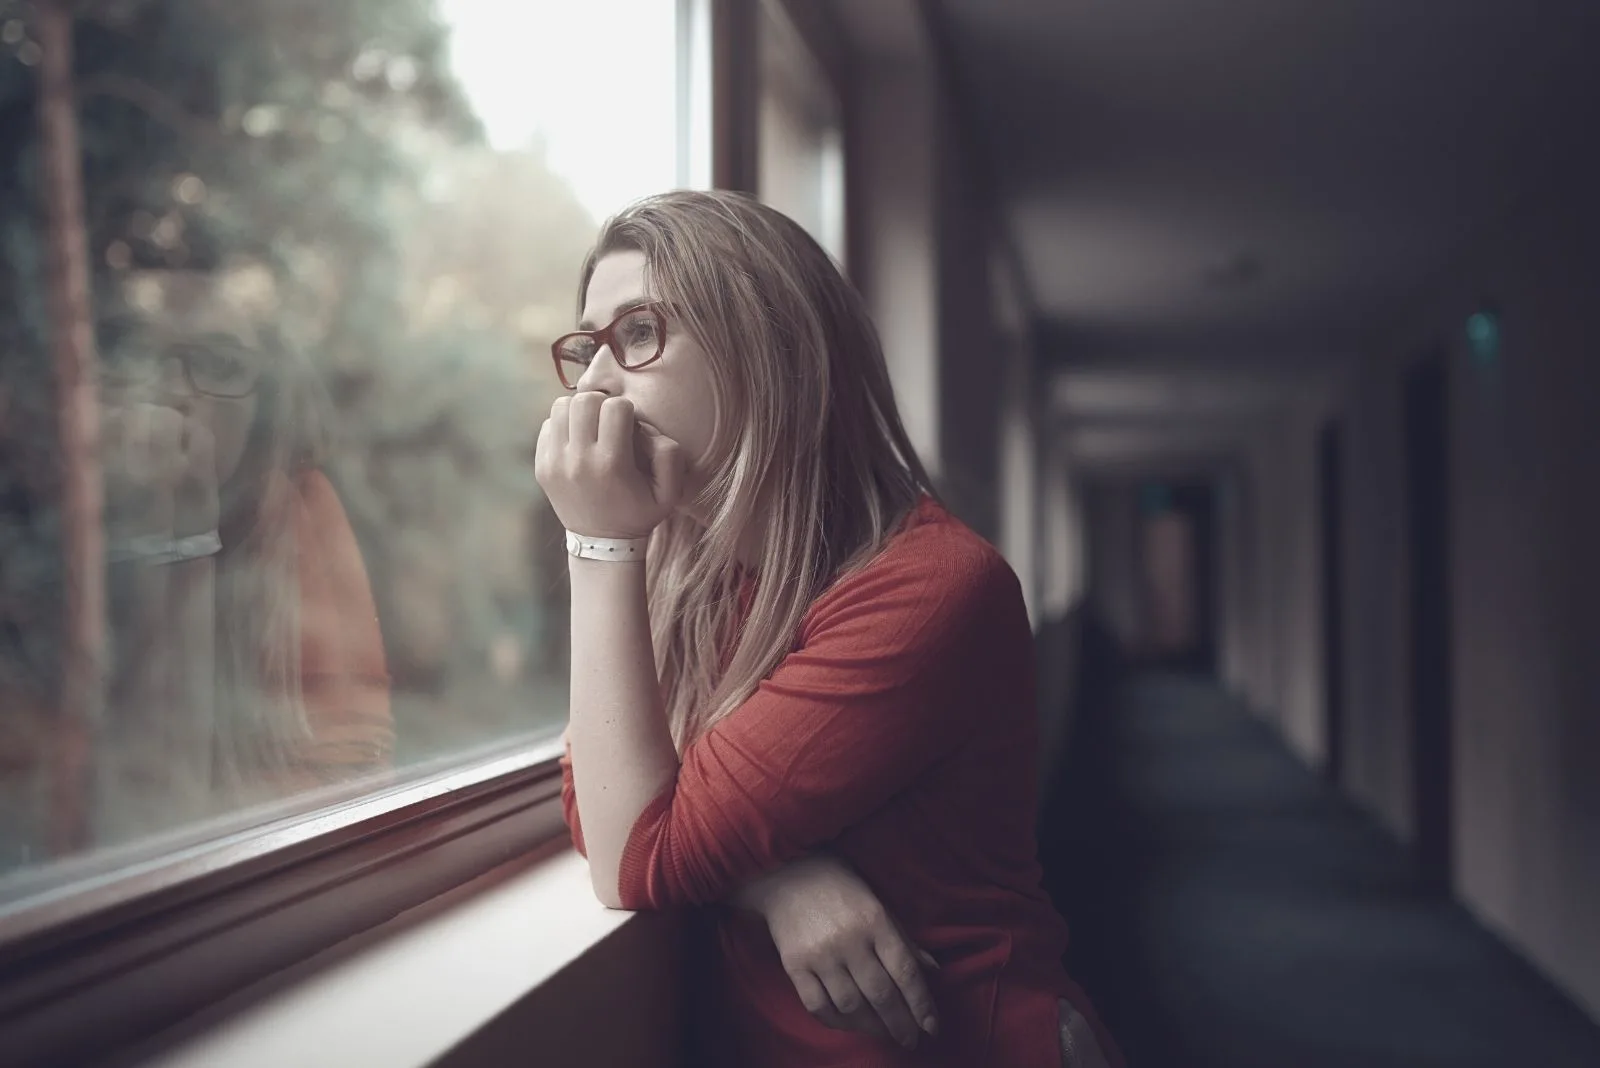 side view of a pensive woman looking outside the window wearing eyeglasses and leaning on the window sill